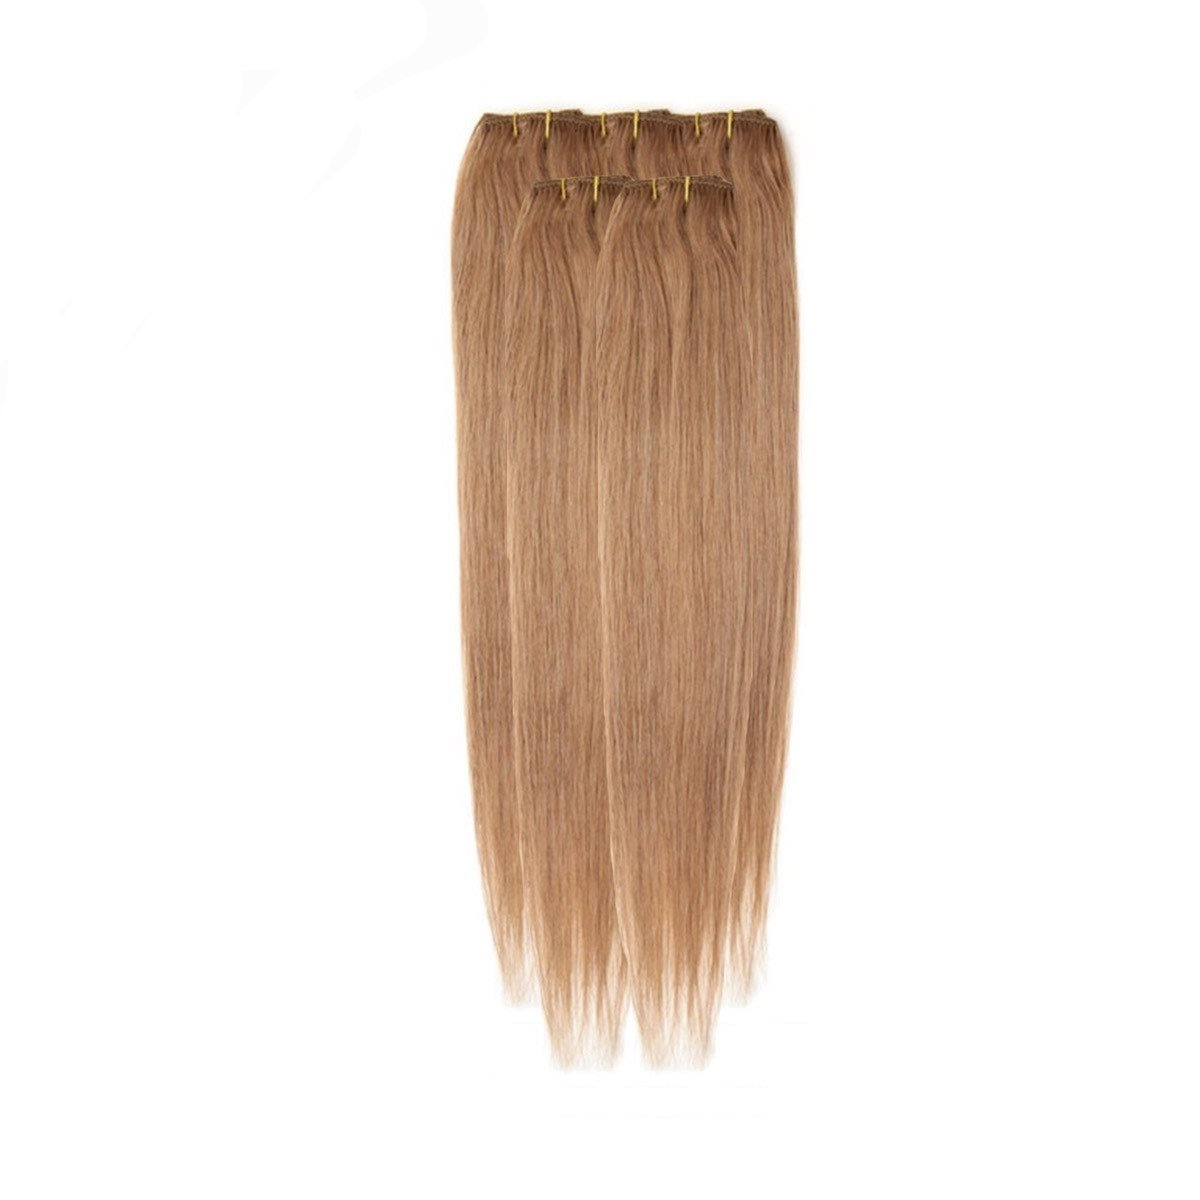 Economy Full Head Clip in Hair 18 inch | Golden Blonde (12) - beautyhair.co.ukHair Extensions